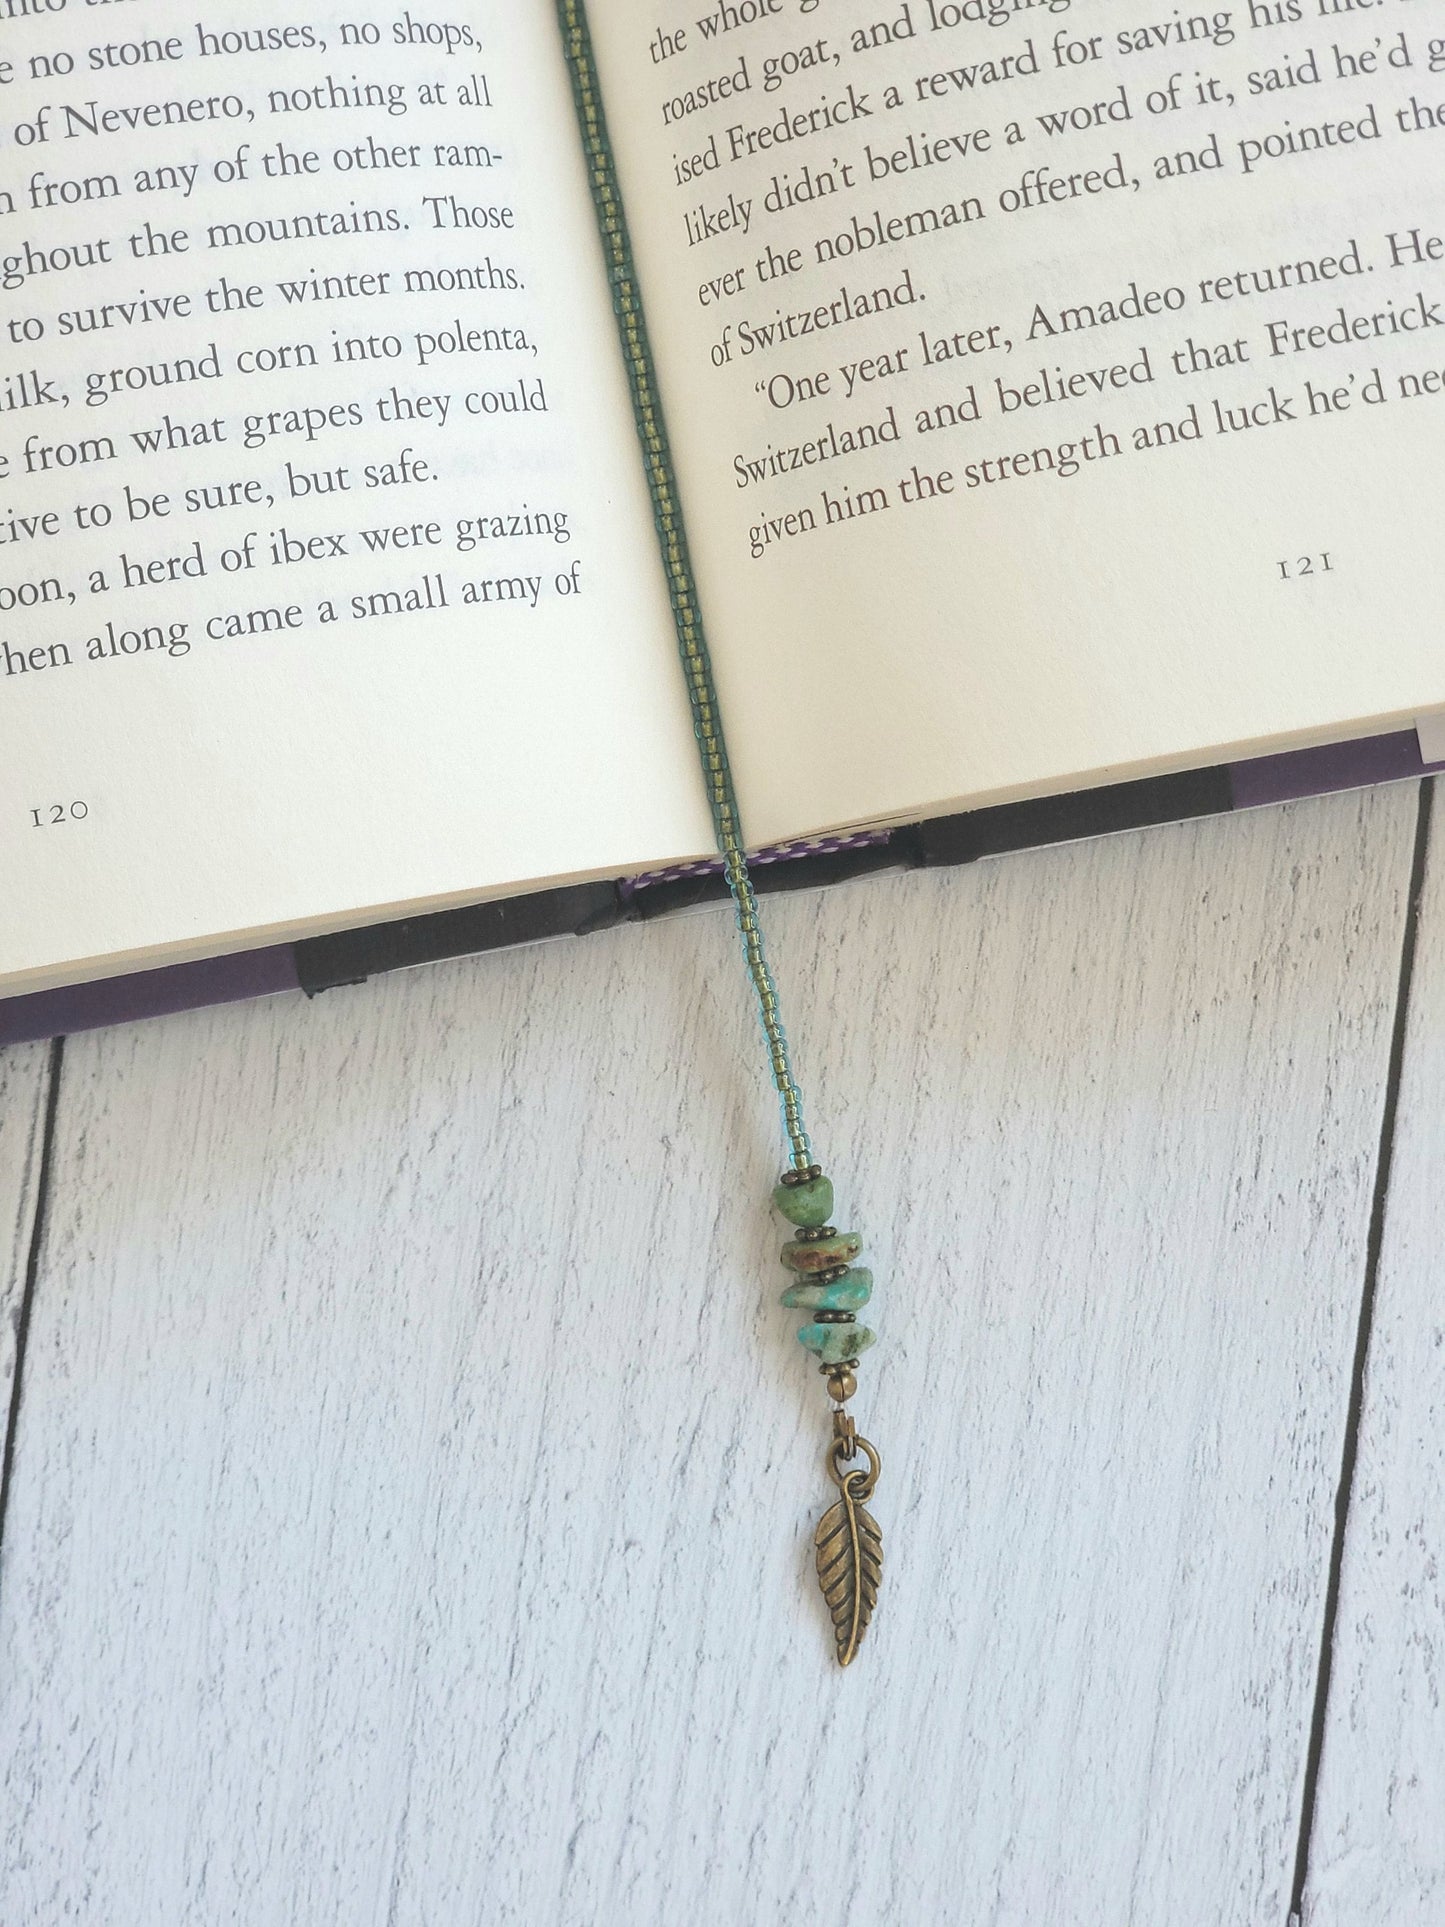 Turquoise Chip Bookmark Makes a Great Gift for the Book Lover